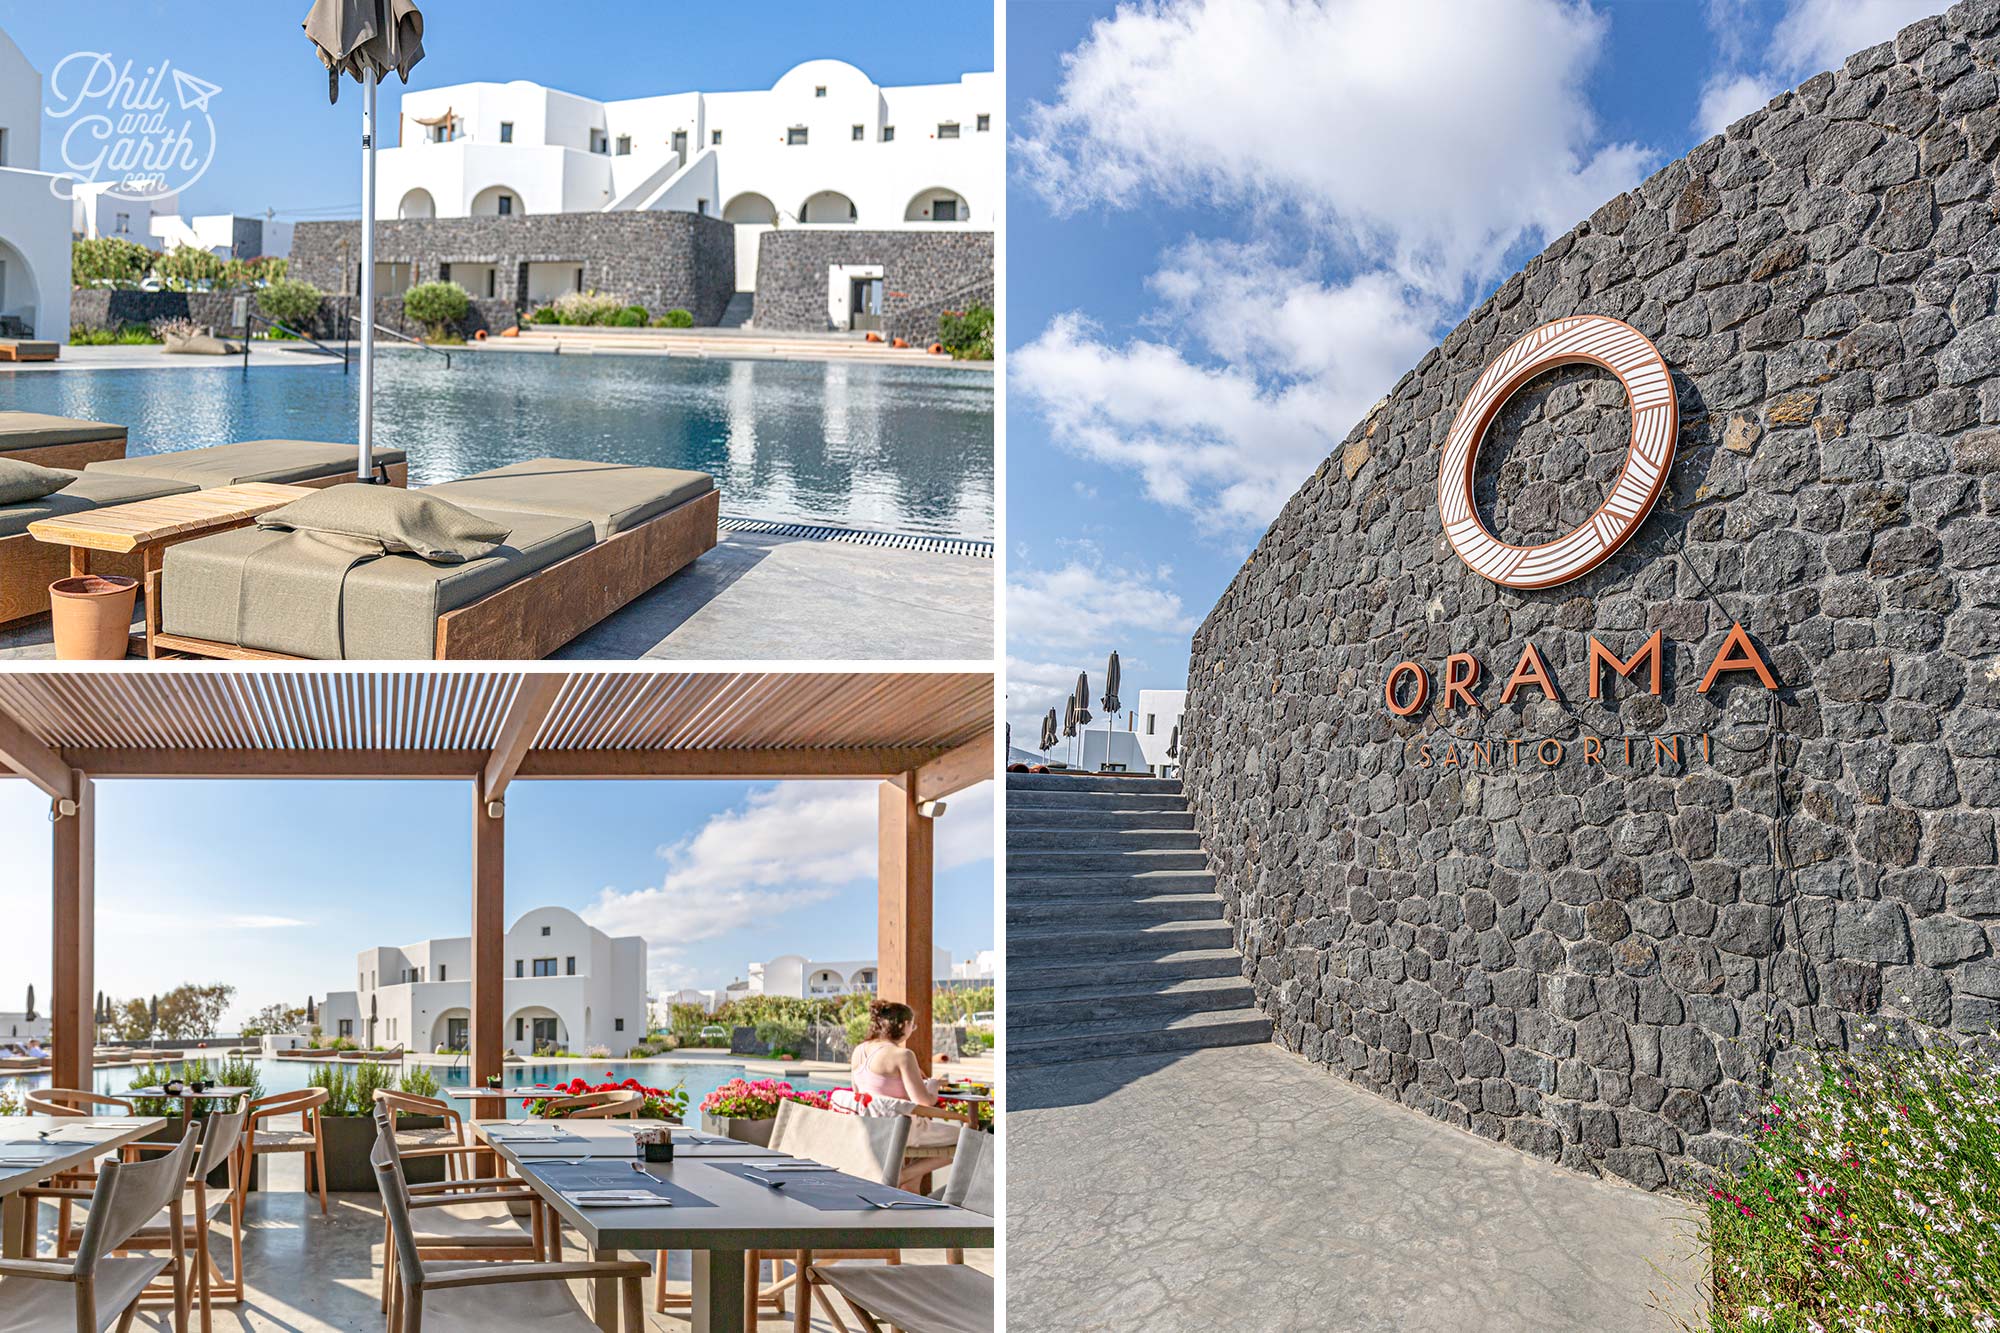 We stayed at the gorgeous Orama Hotel & Spa in Fira